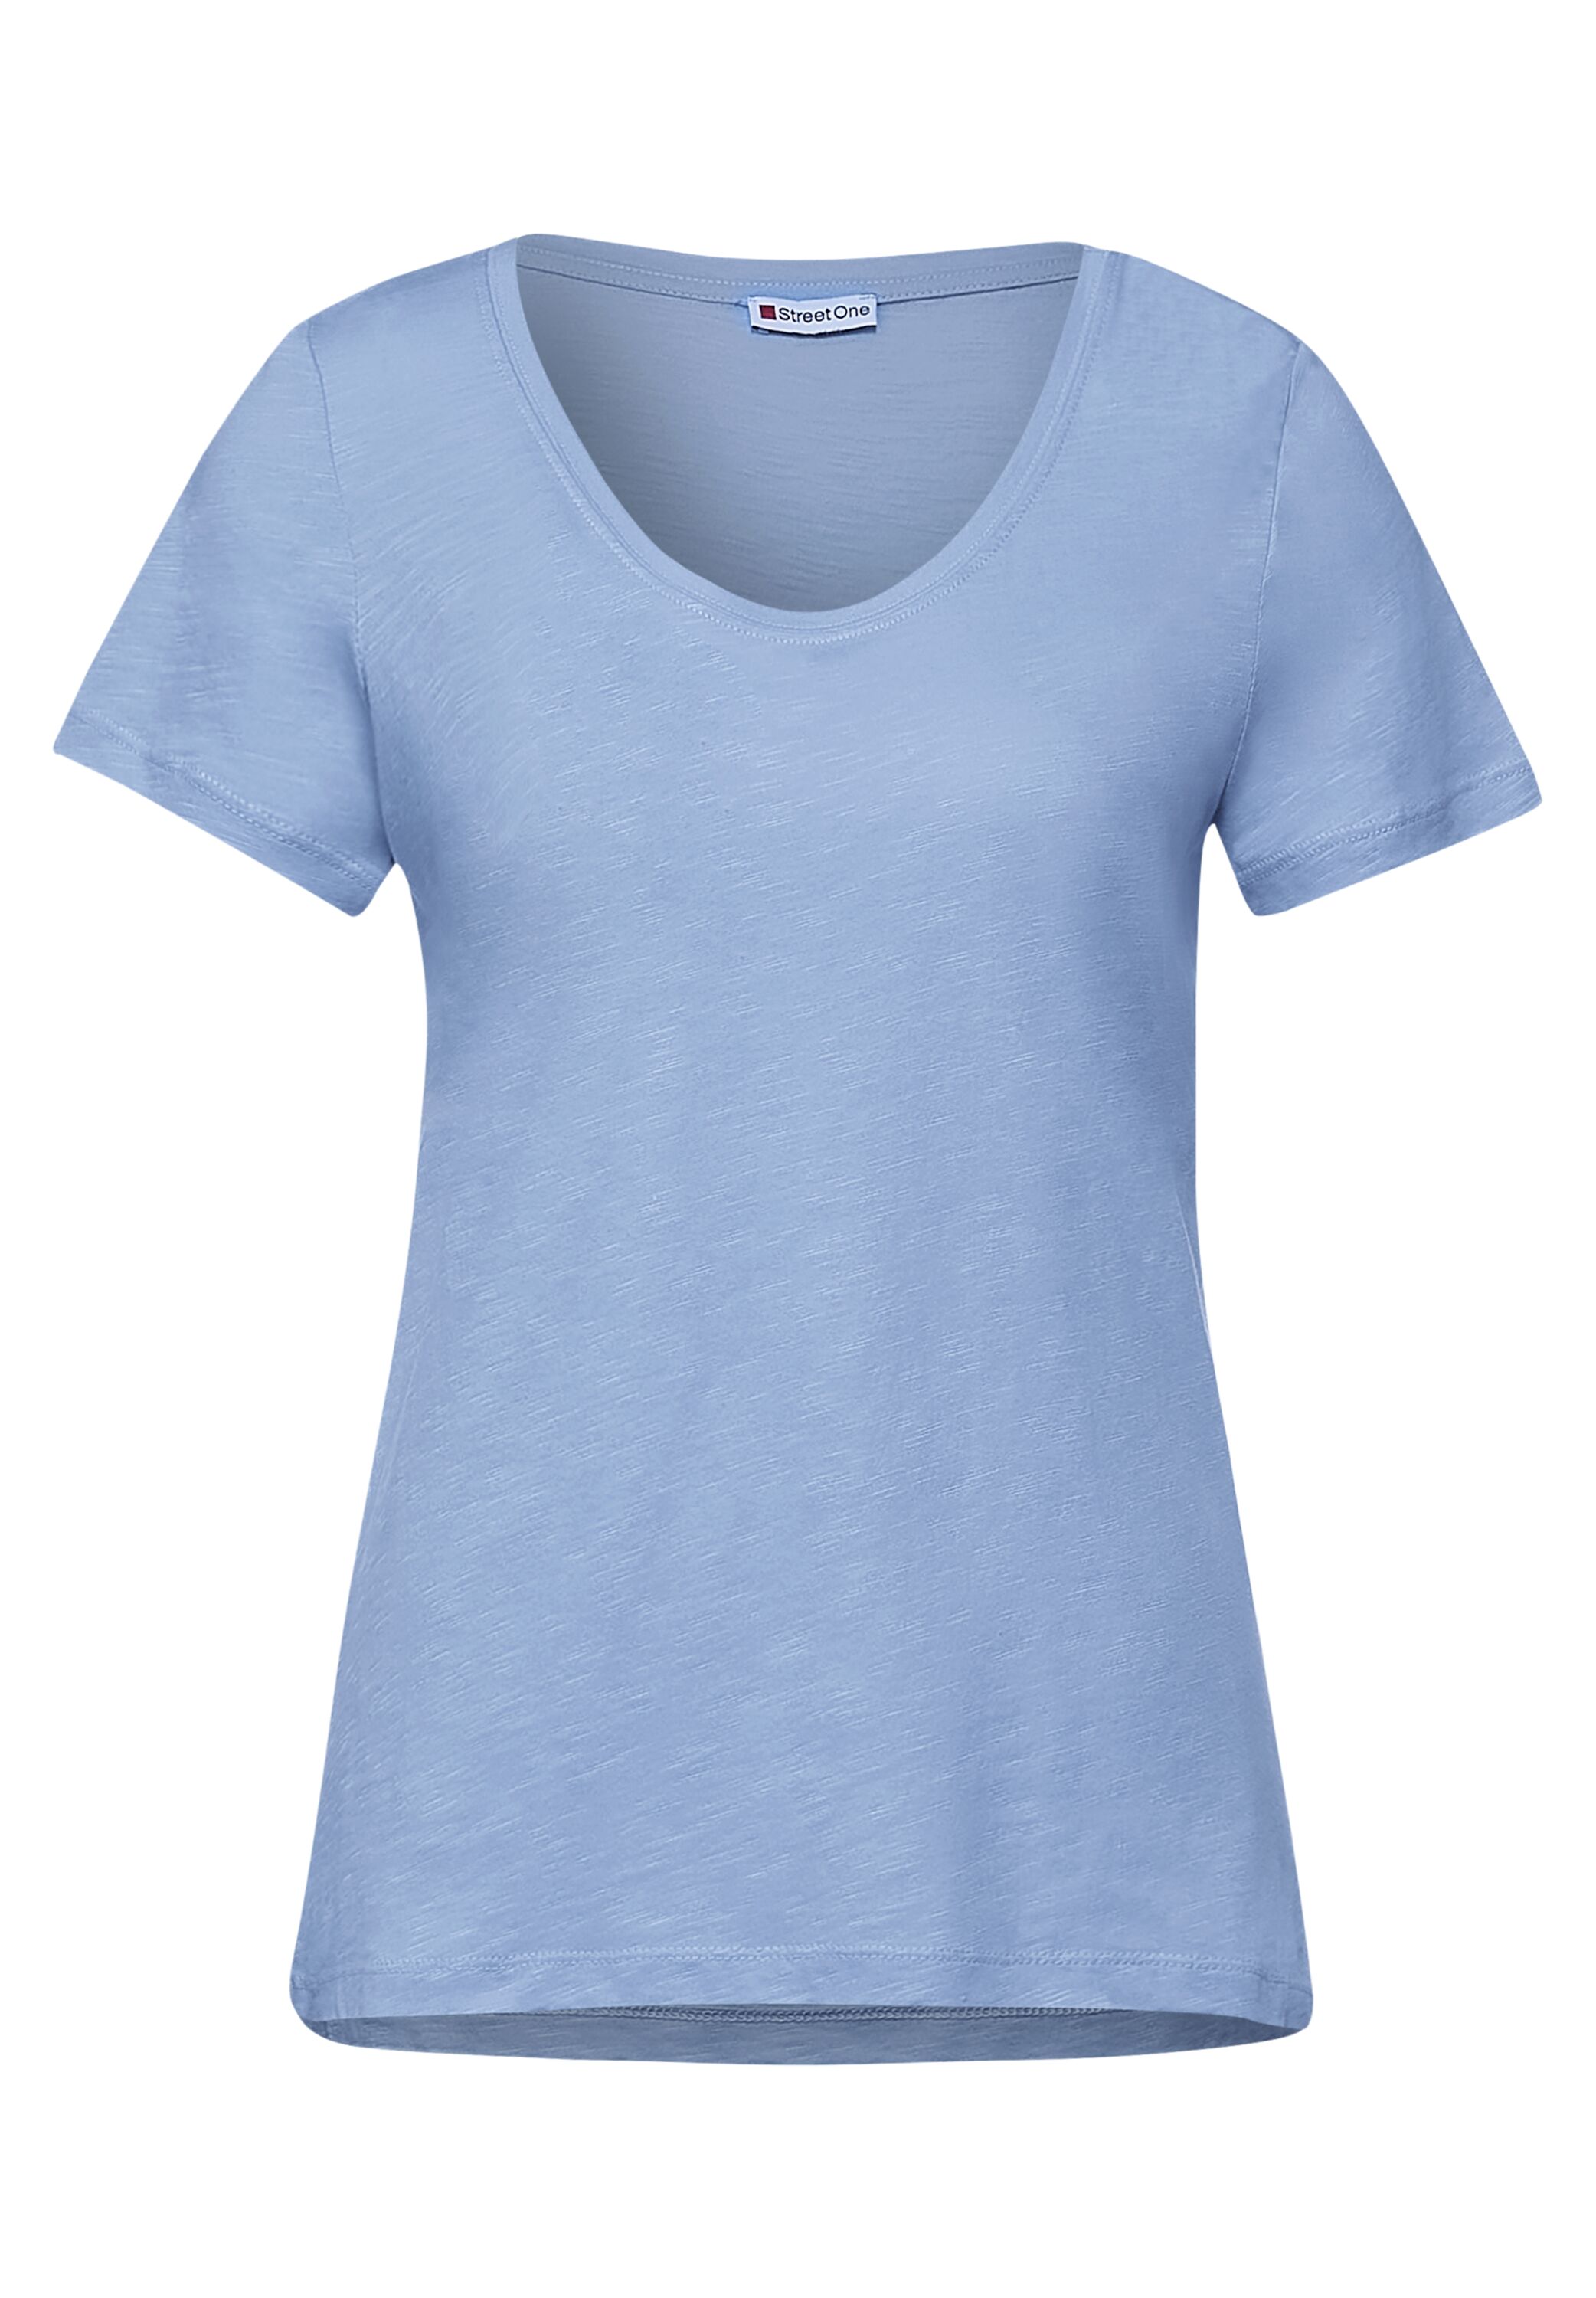 Mode Sunny Blue CONCEPT - A316300-13032 T-Shirt Gerda in One Street Mid